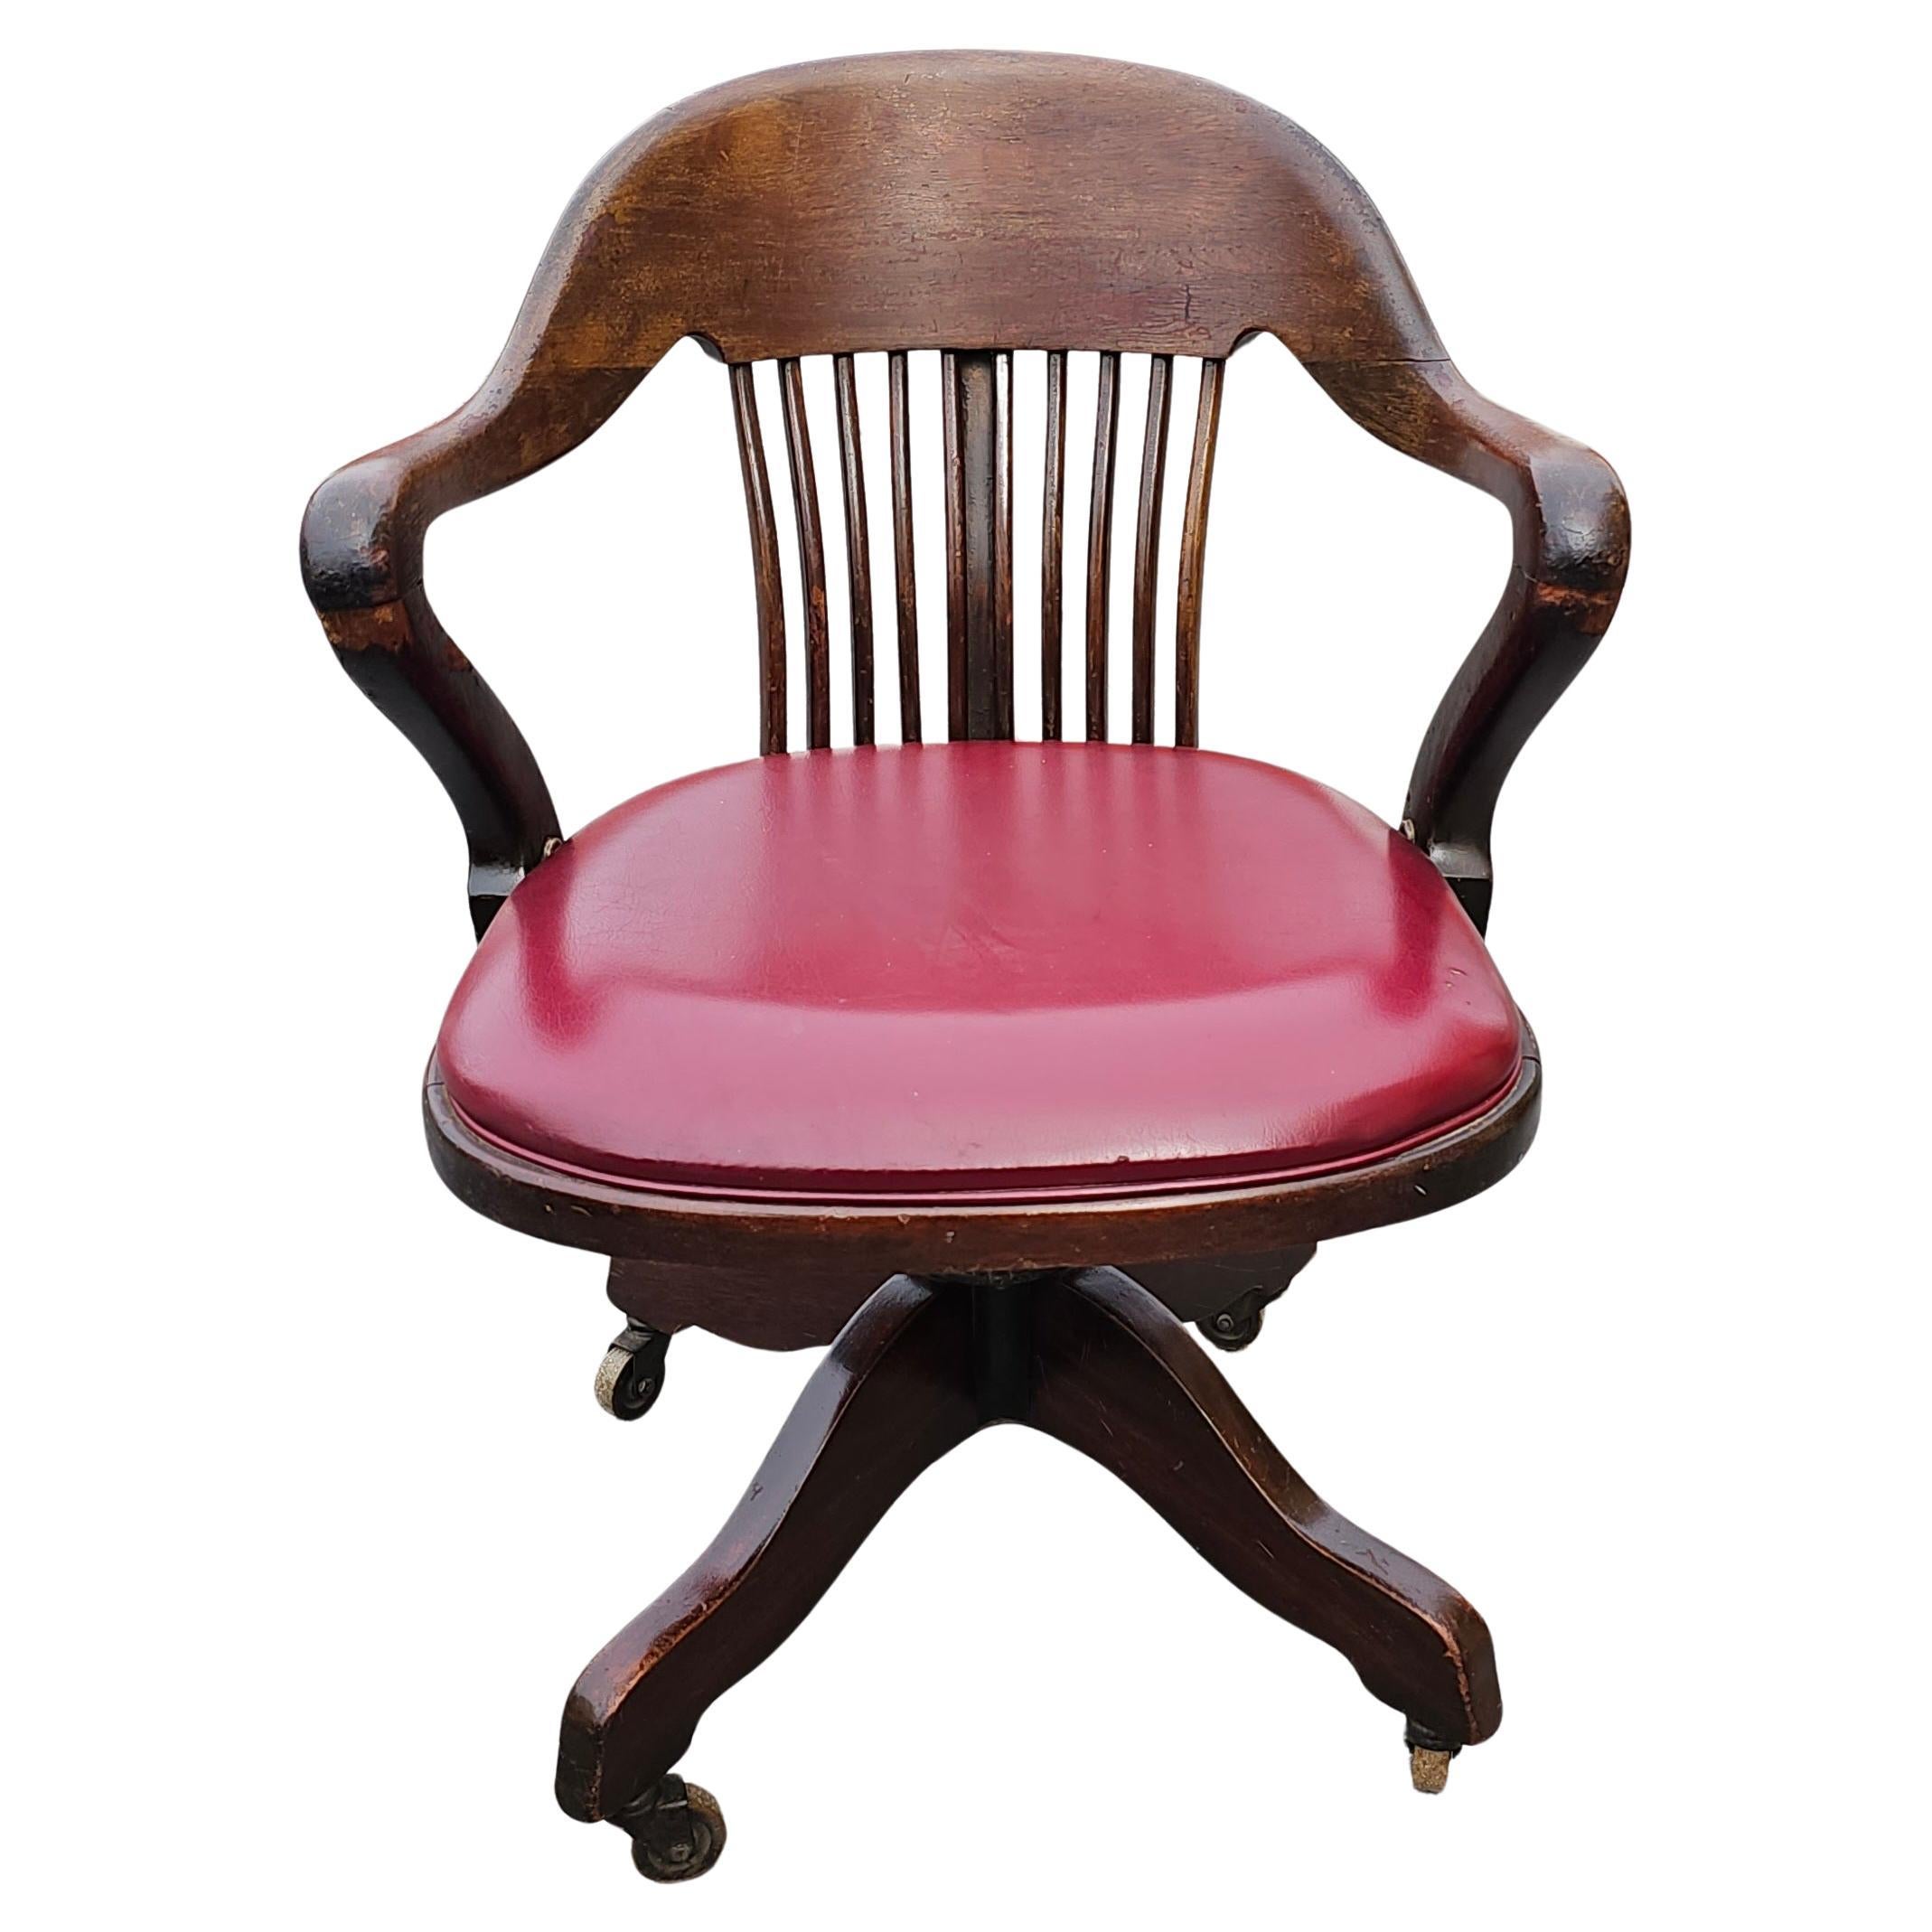 An Early 20th Century Oak and Vinyl Upholstered Seat Rolling, tilting and Swivelling Banker's Chair. Measures 23.5